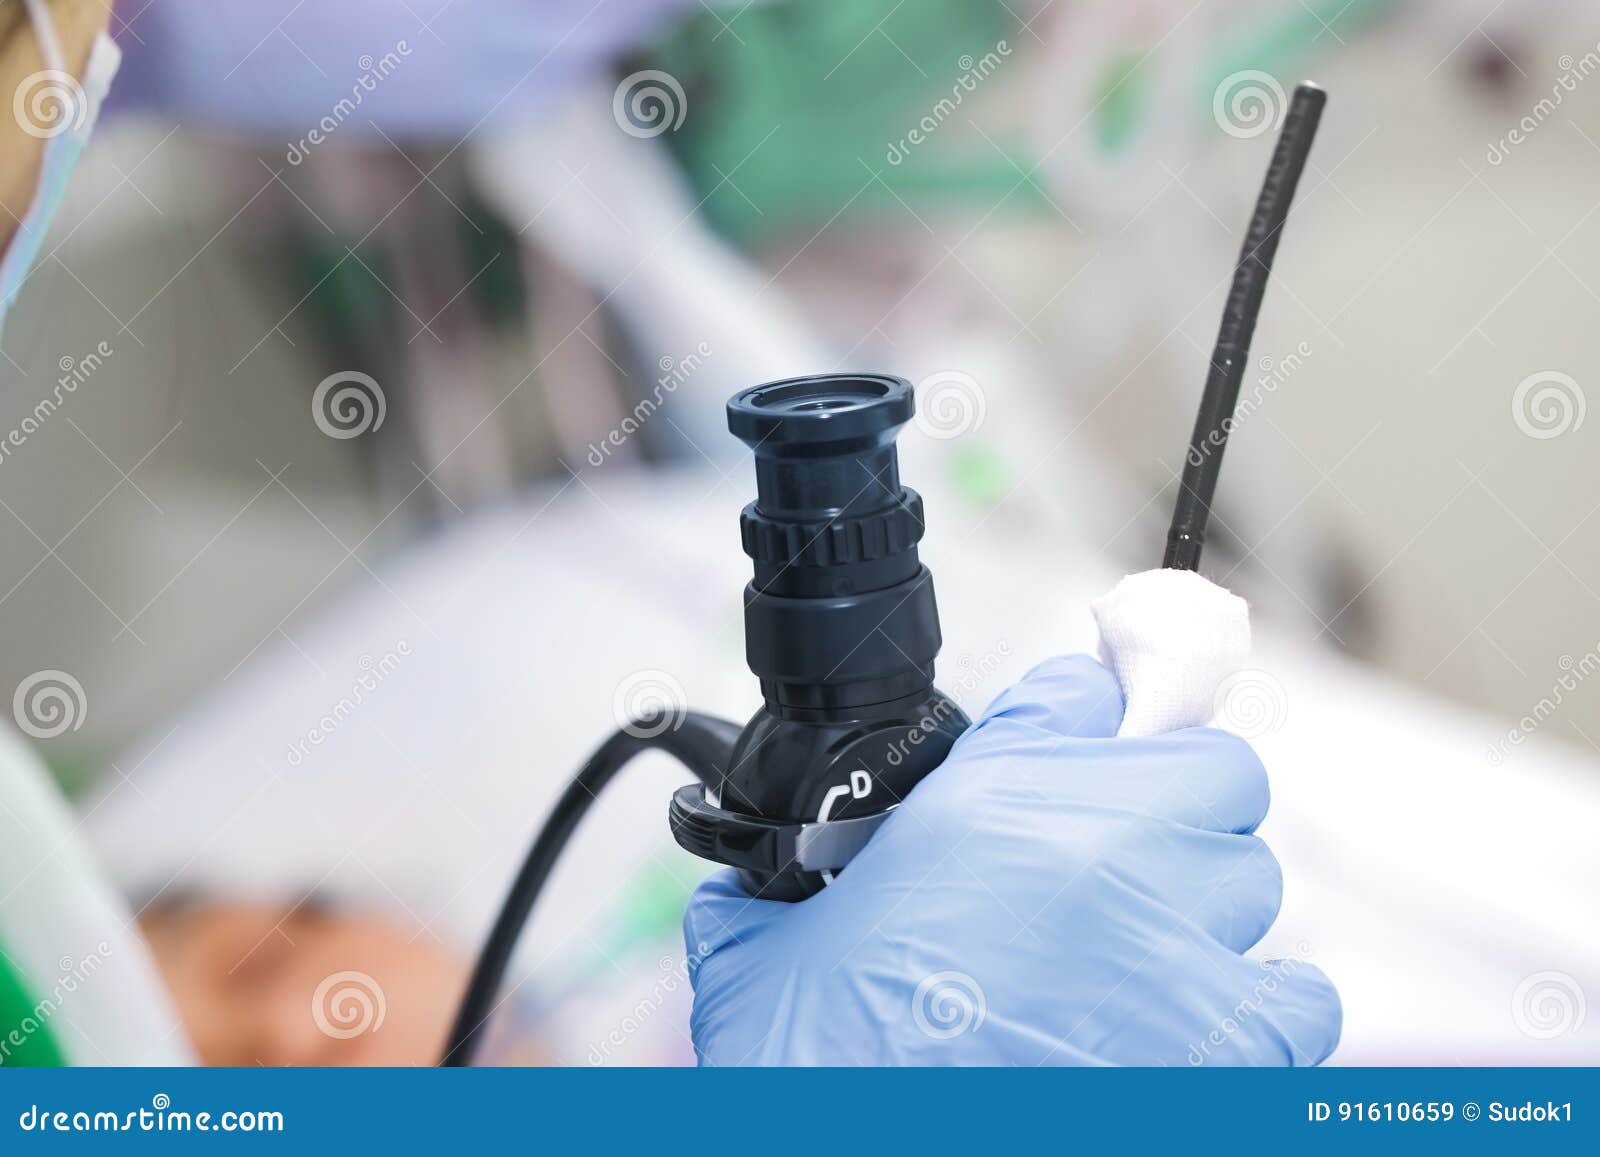 endoscope in the hands of an endoscopist. readiness to work